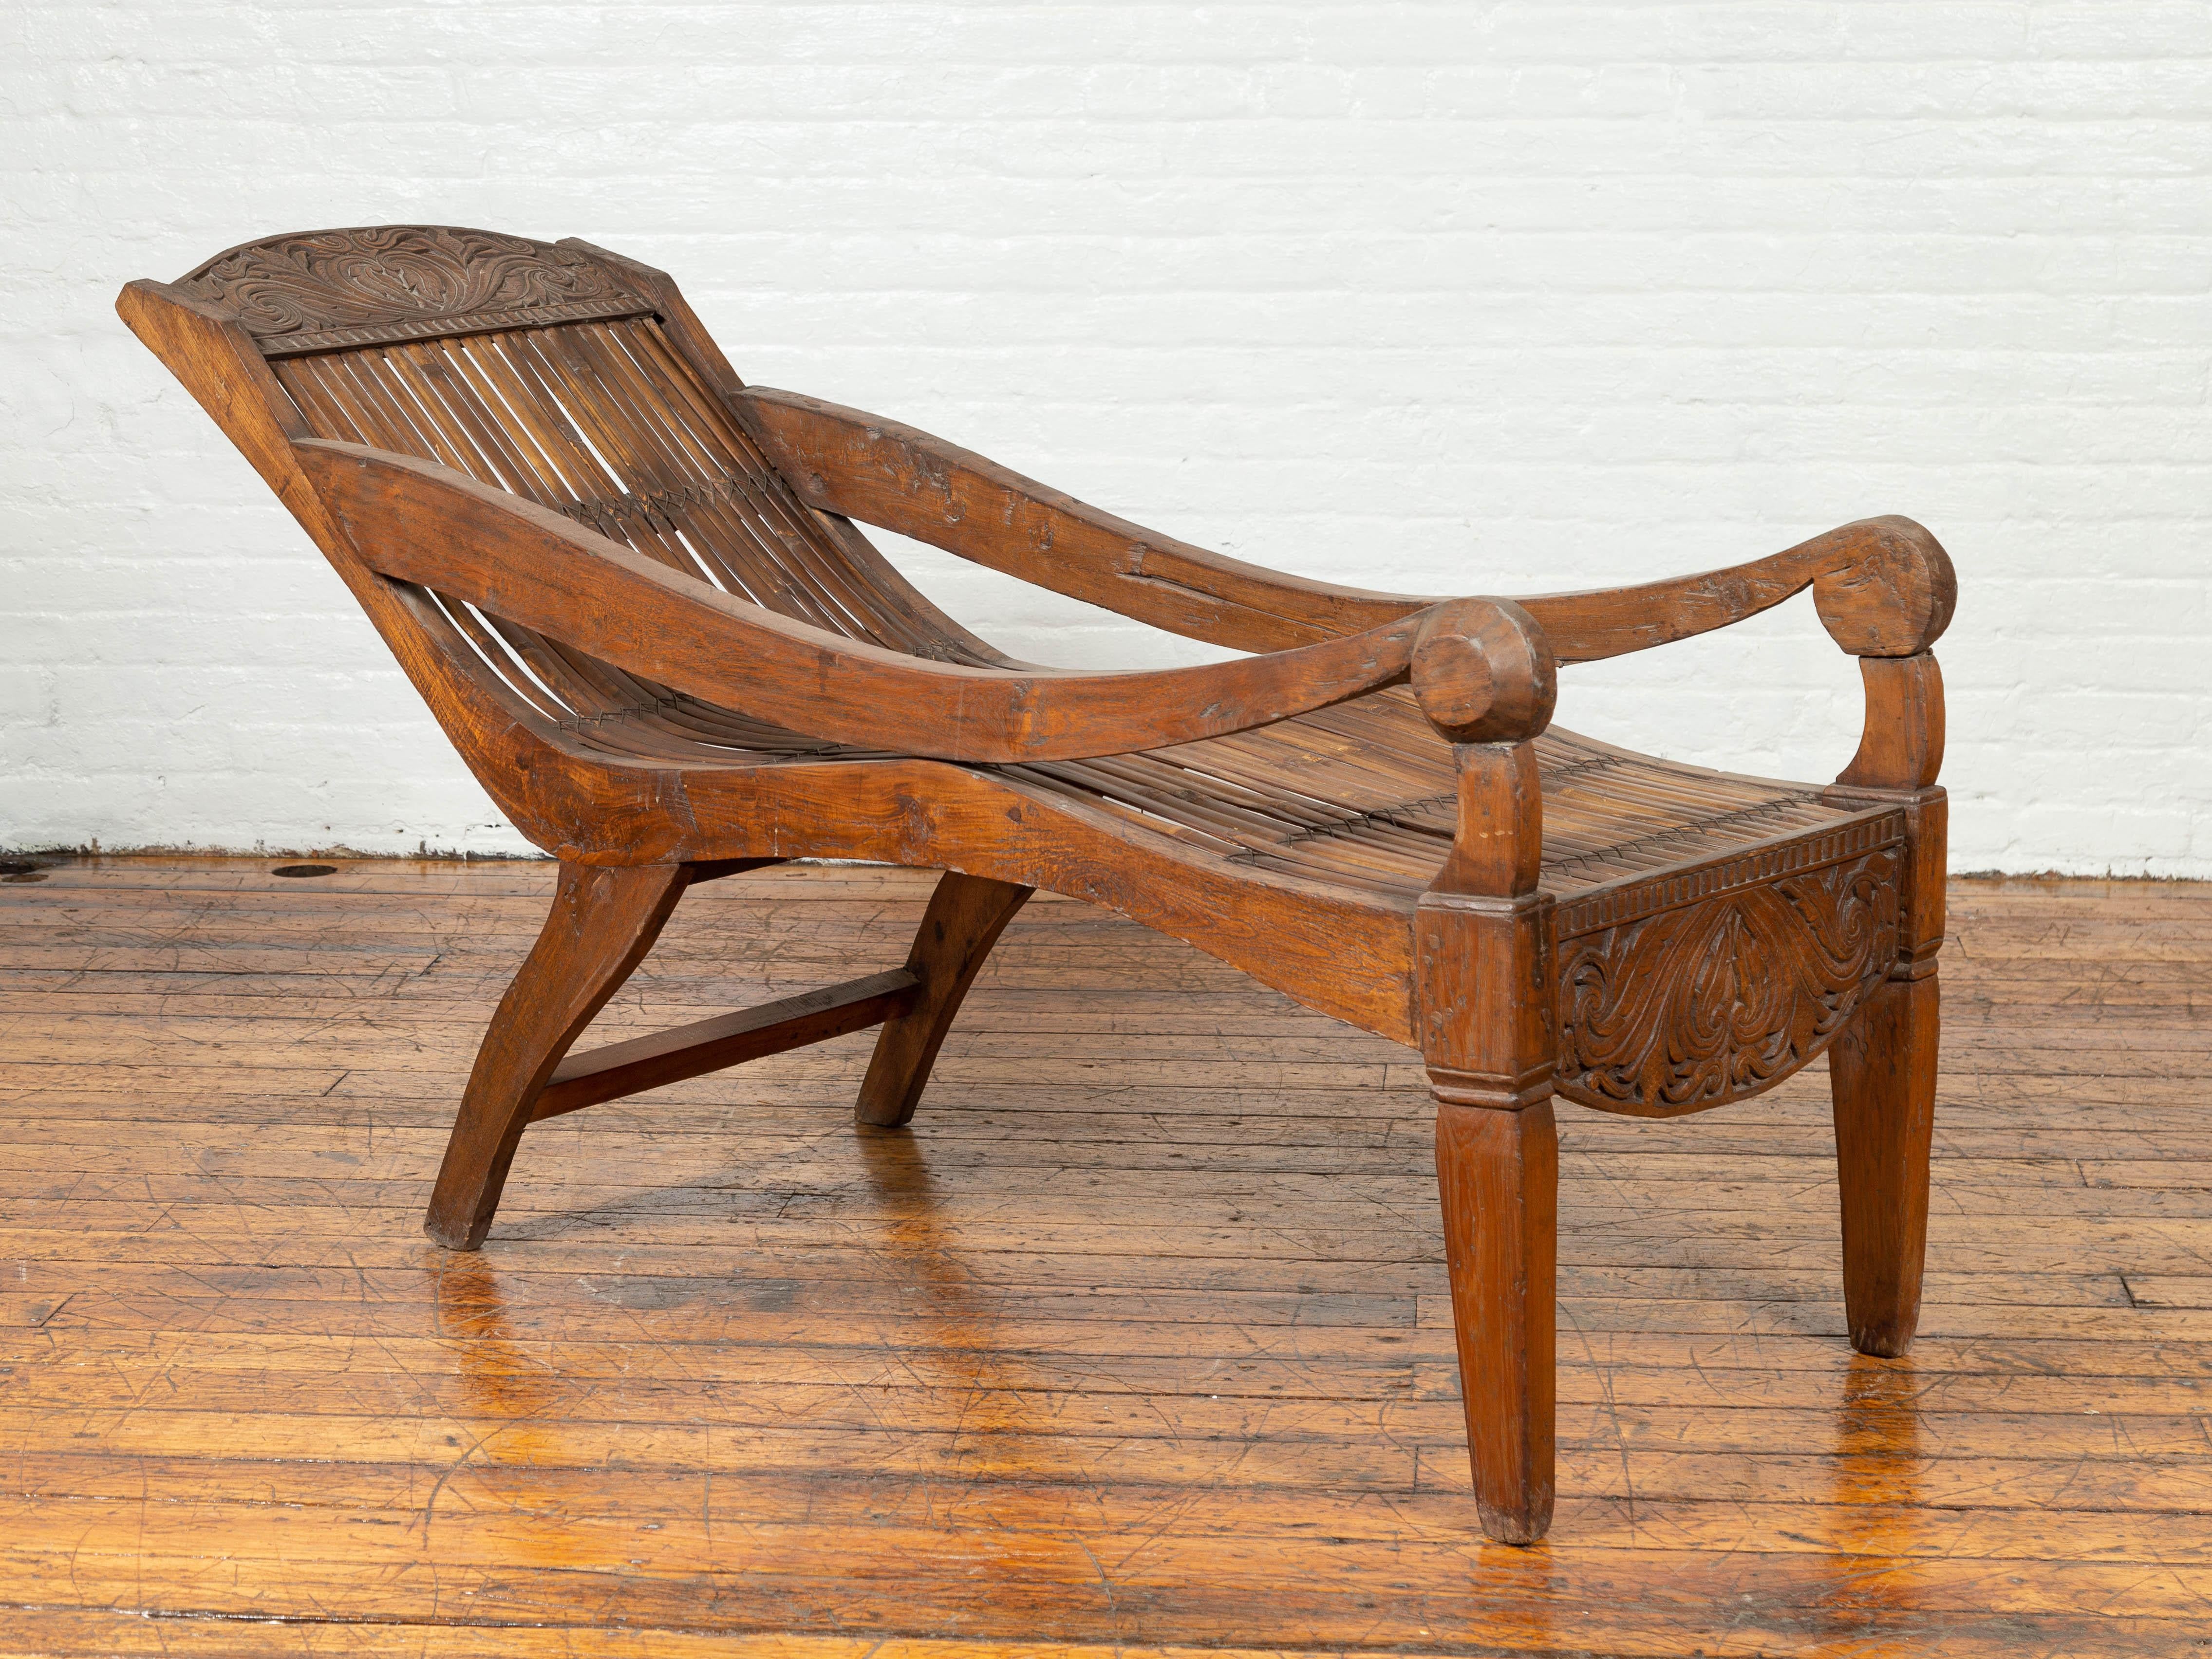 An antique Indonesian reclining plantation lounge chair with bamboo slats and carved motifs. Designed to provide a relaxing experience to the sitter, this Indonesian lounge chair features a nicely curving body with bamboo slats, accented with two